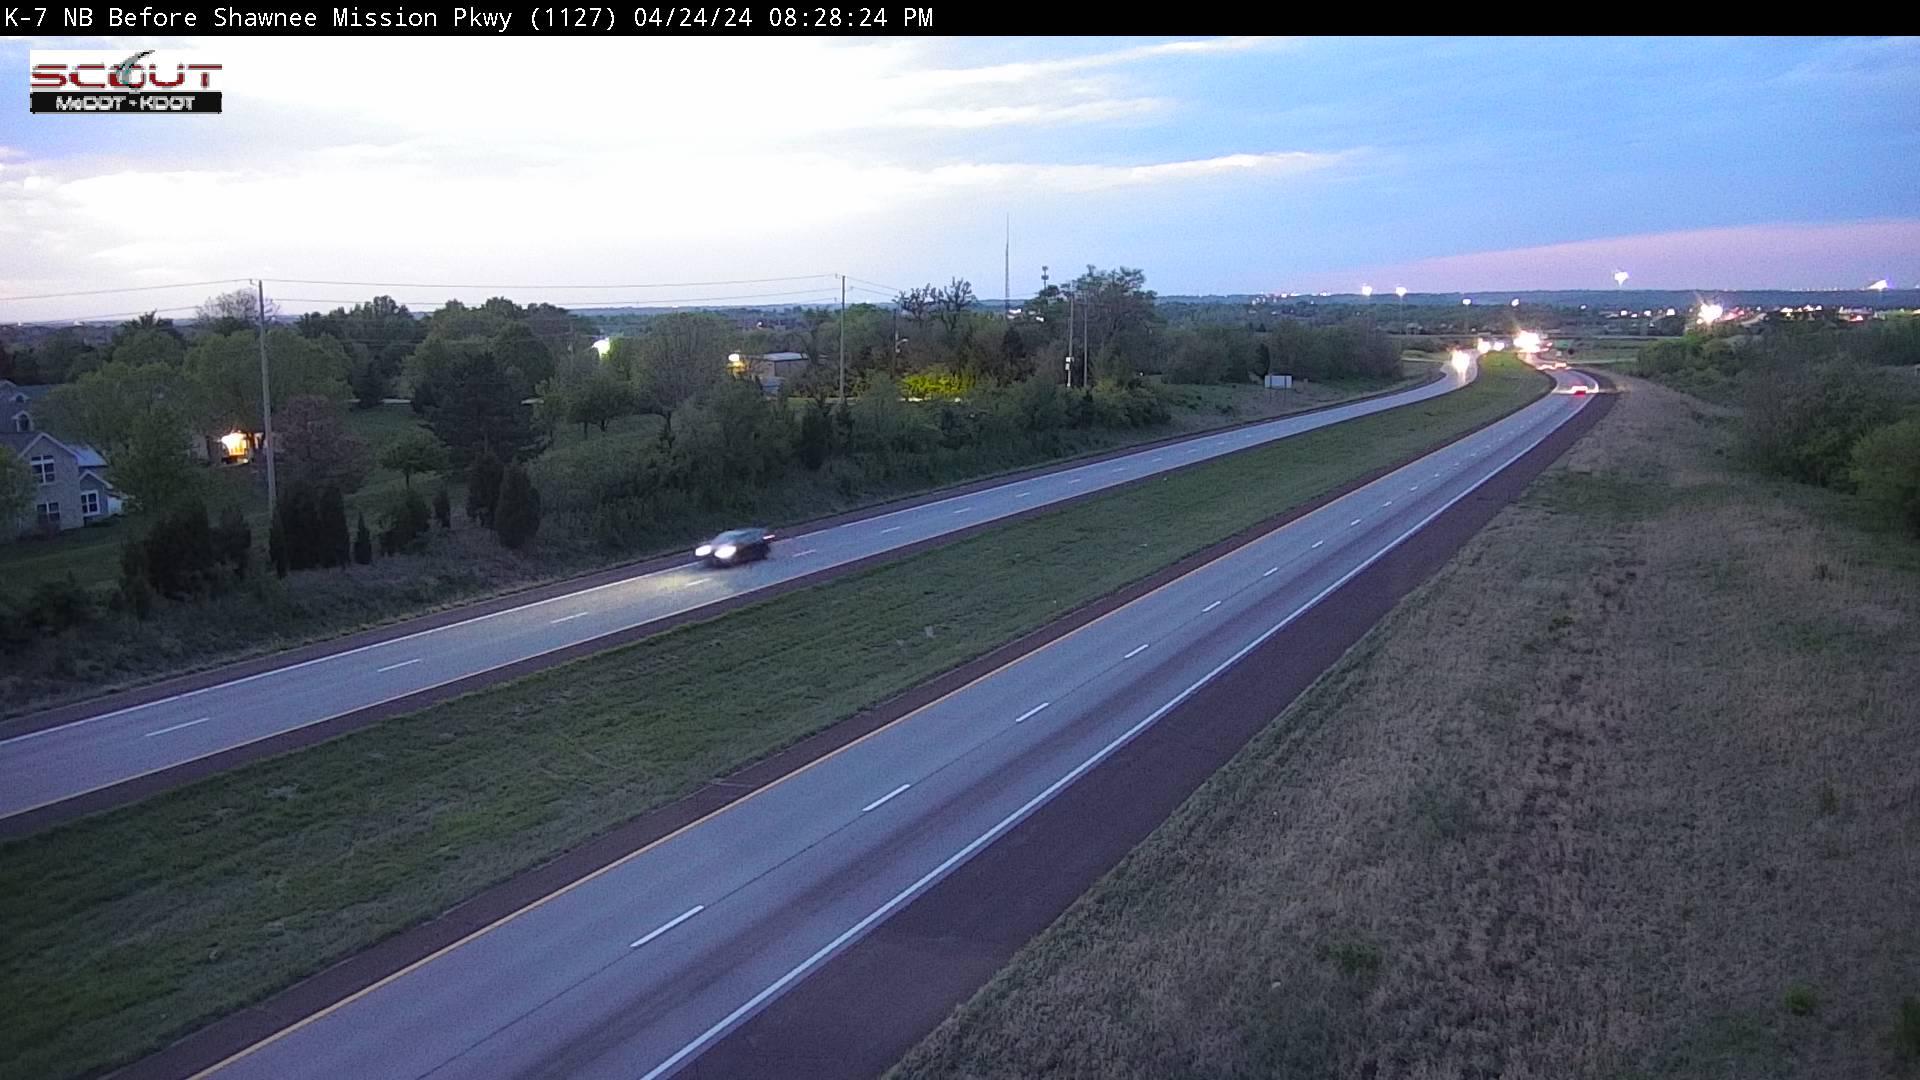 Traffic Cam Shawnee: K- N @ S of - Mission Parkway Player